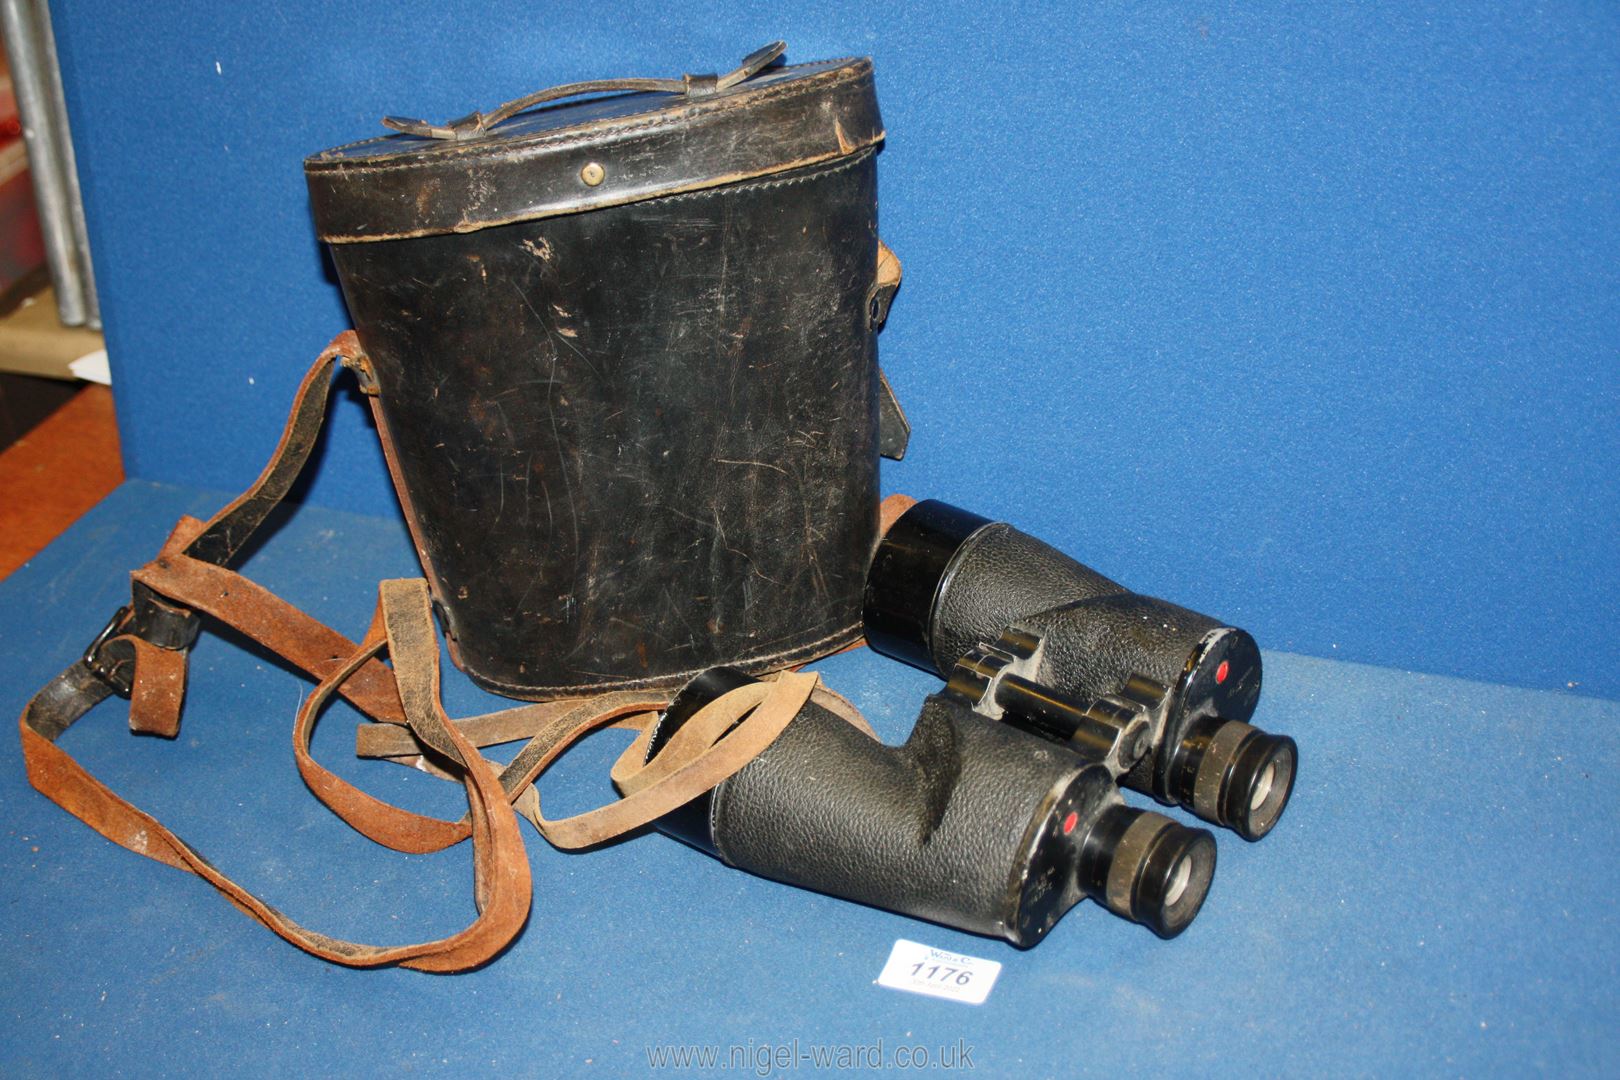 A pair of cased Binoculars, dated 1944, marked R.E.L/Canada, 7 x 50.